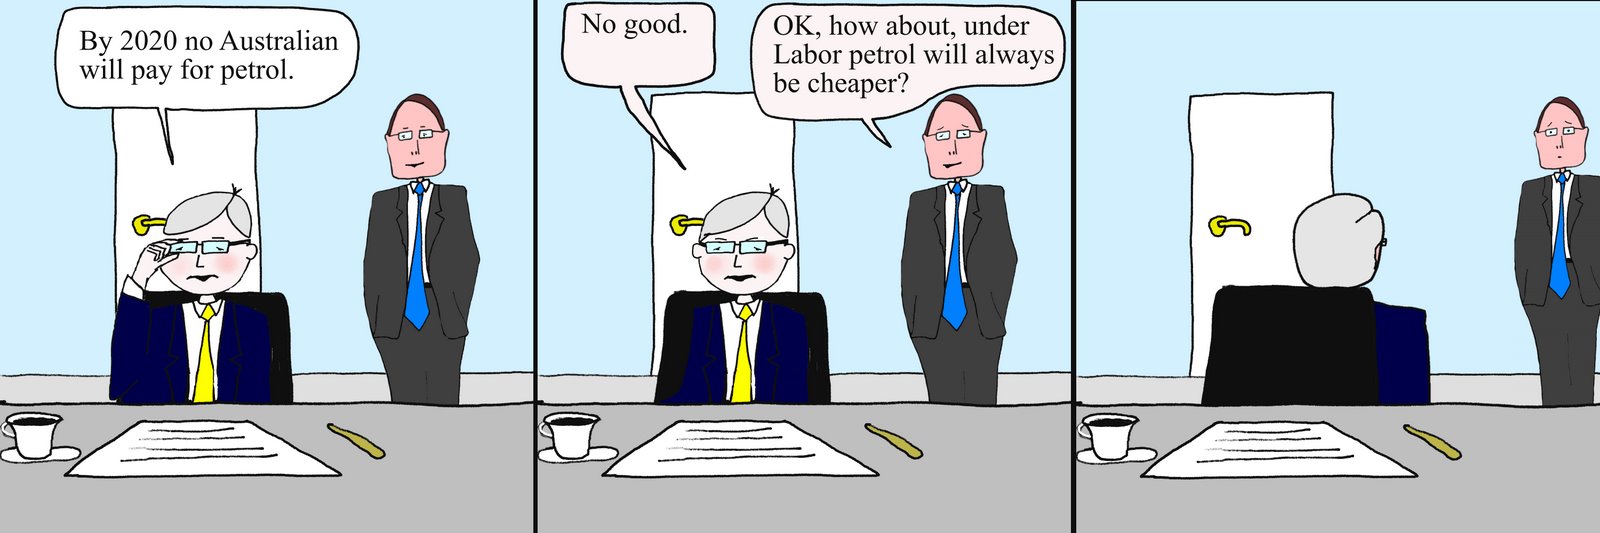 Kevin Rudd petrol prices